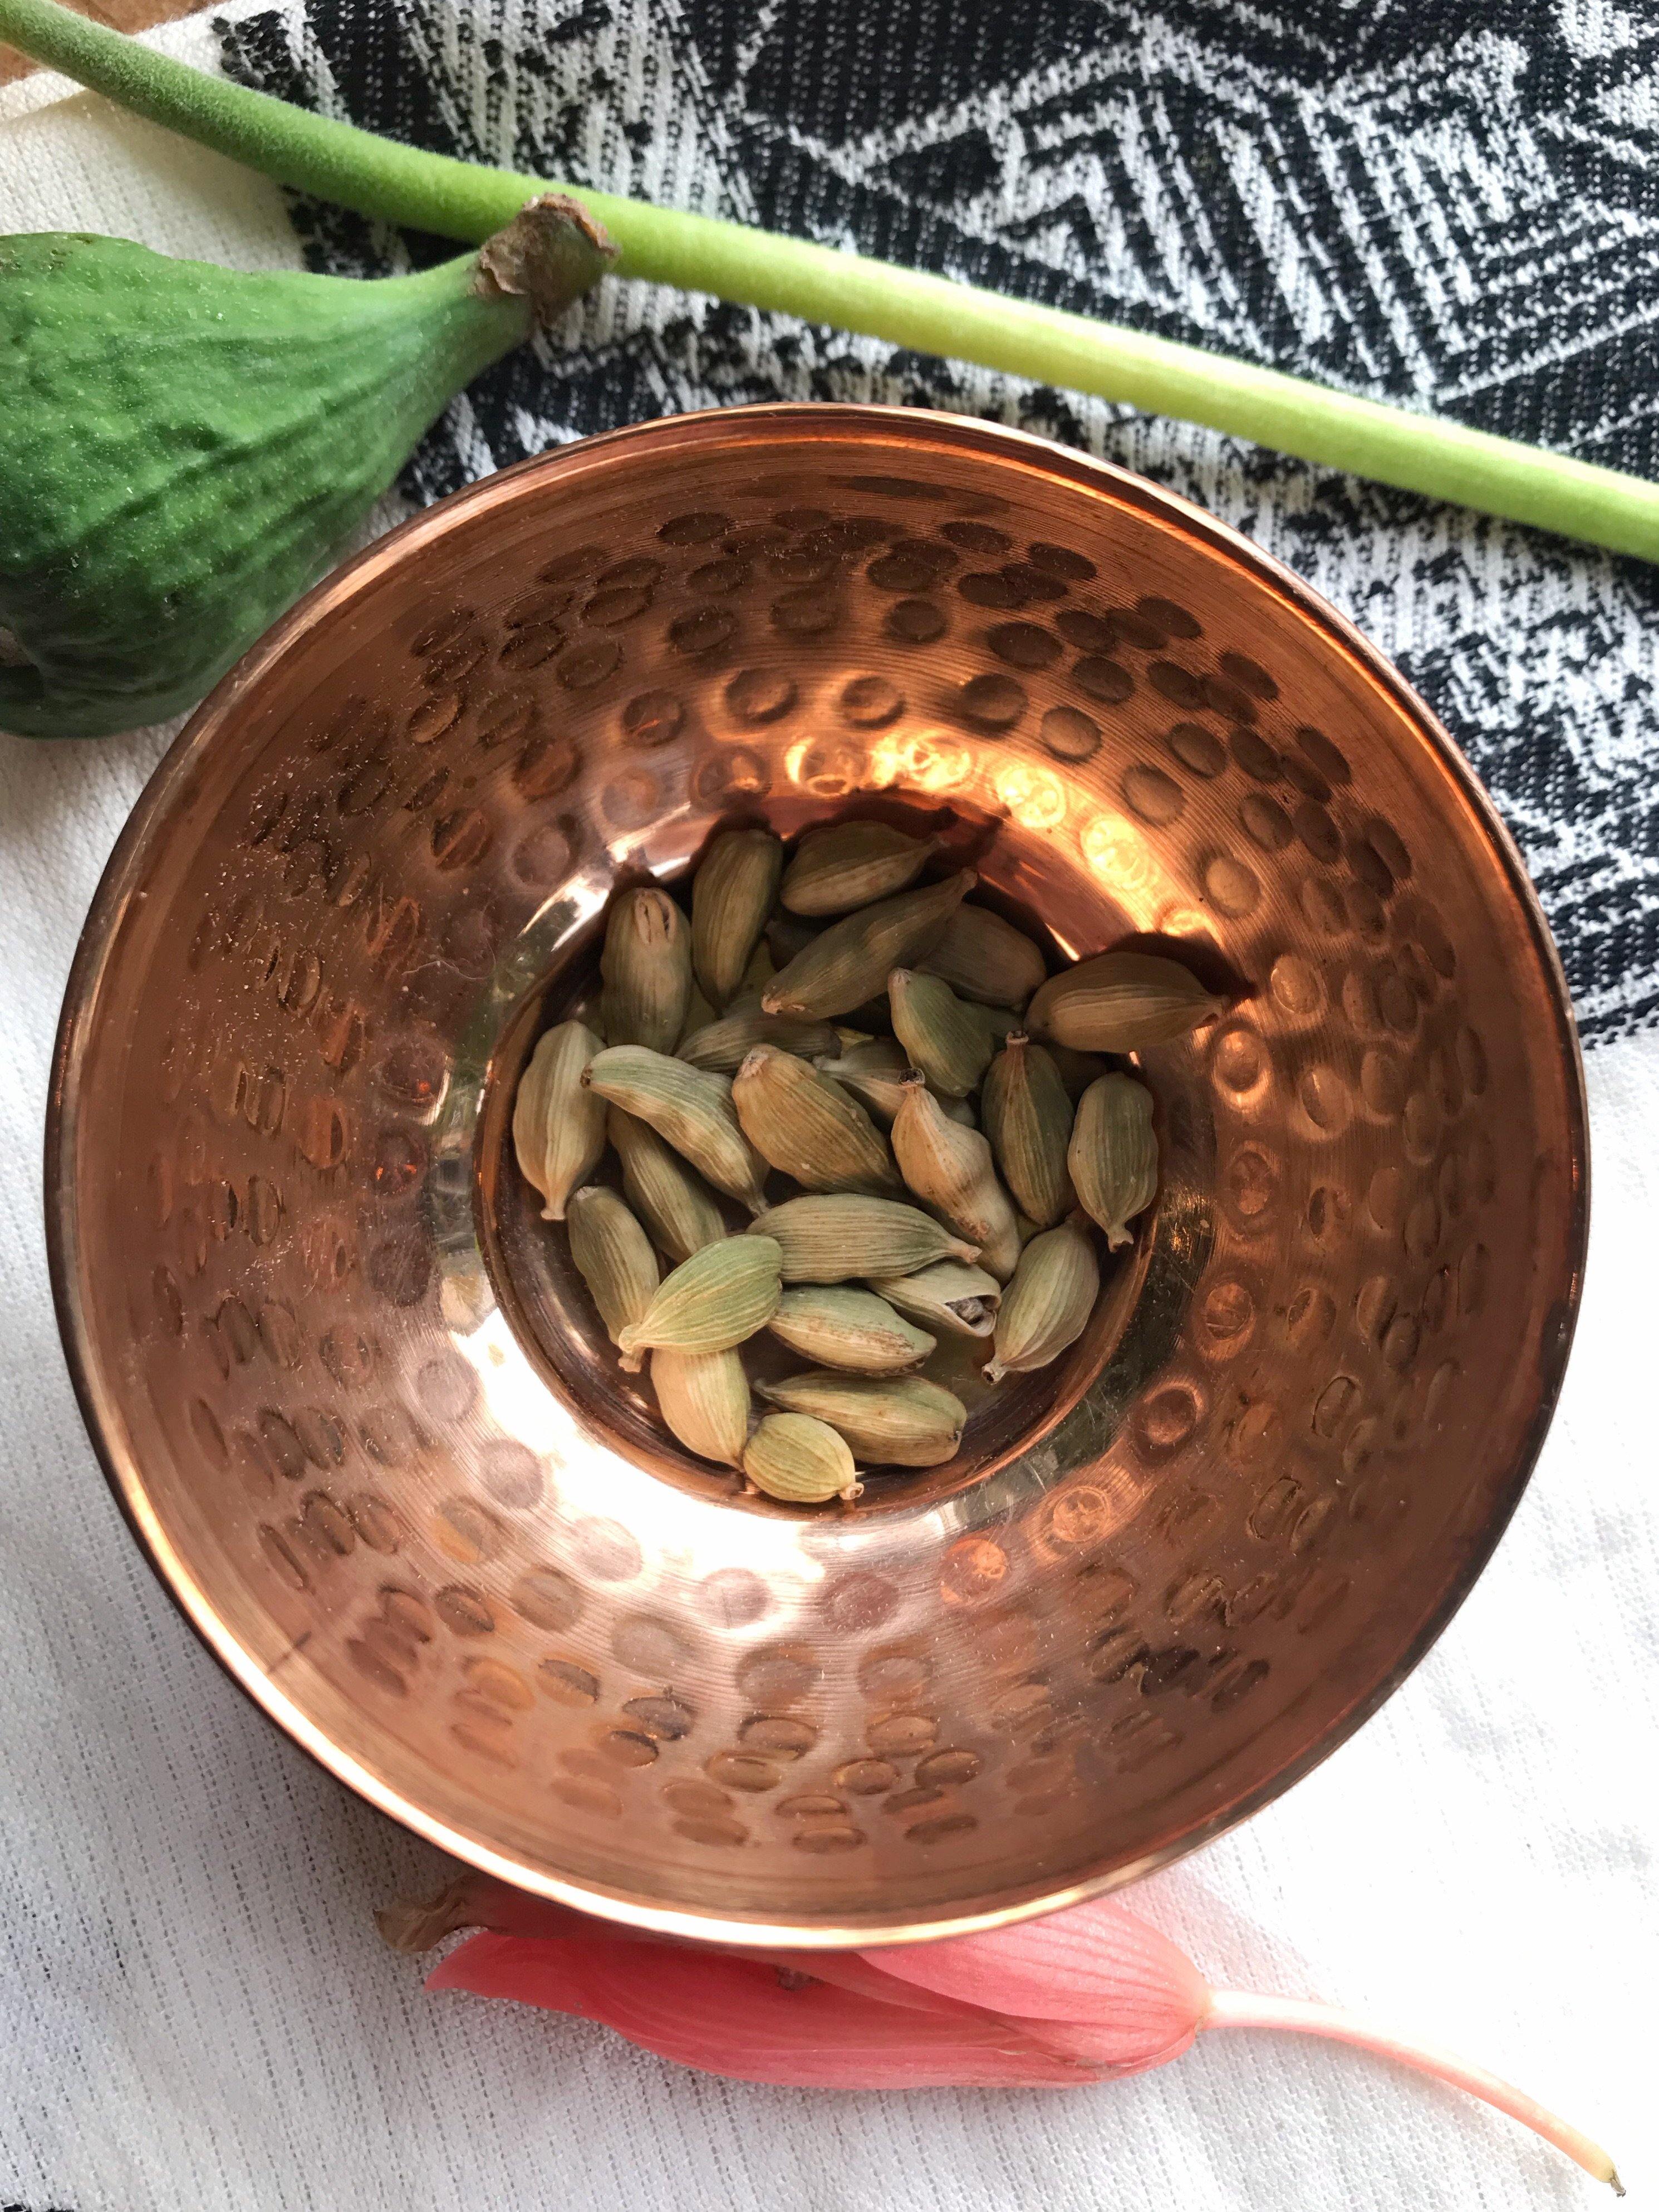 Cardamom Pods (Elettaria cardamomum) - Witching Herbs - Keven Craft Rituals